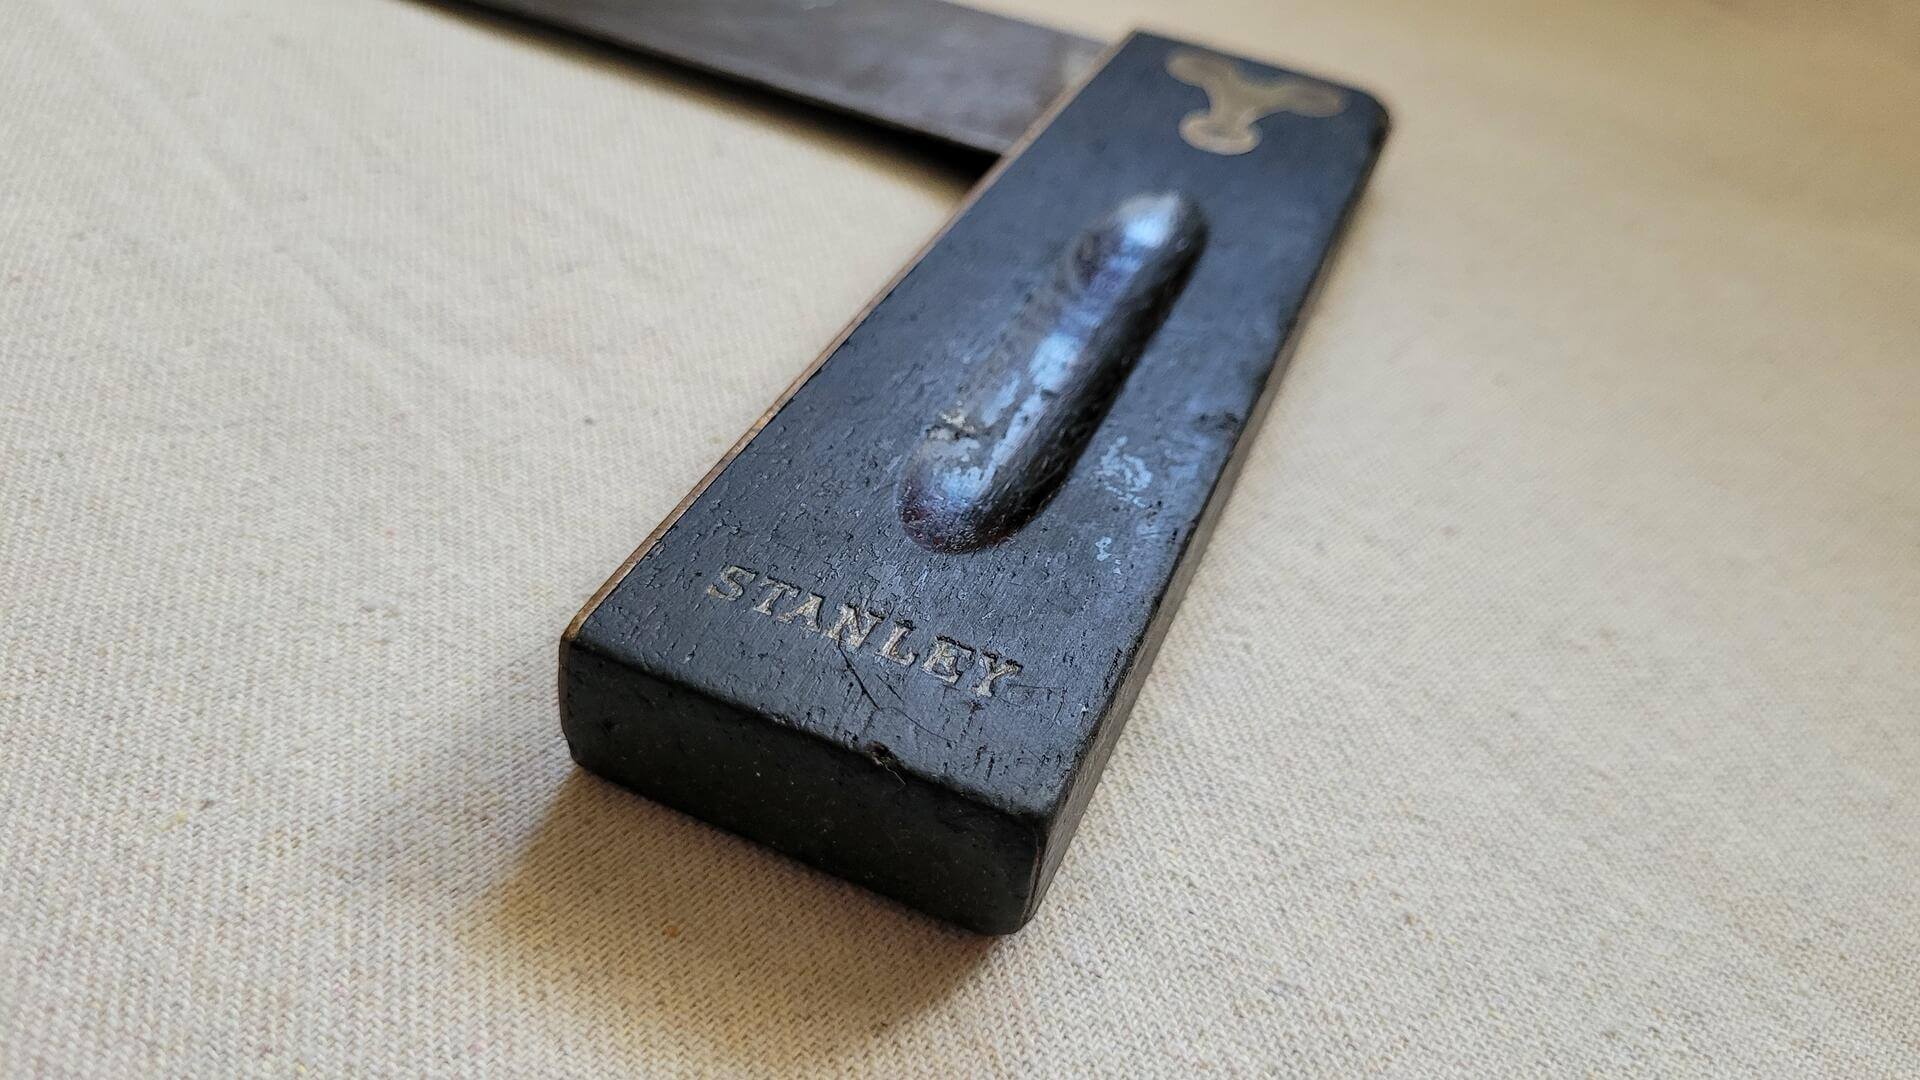 stanley-No-20-sweetheart-woodworking-square-9-inches-made-in-canada-antique-vintage-collectible-carpentry-marking-measuring-hand-tools-makers-brand-logo